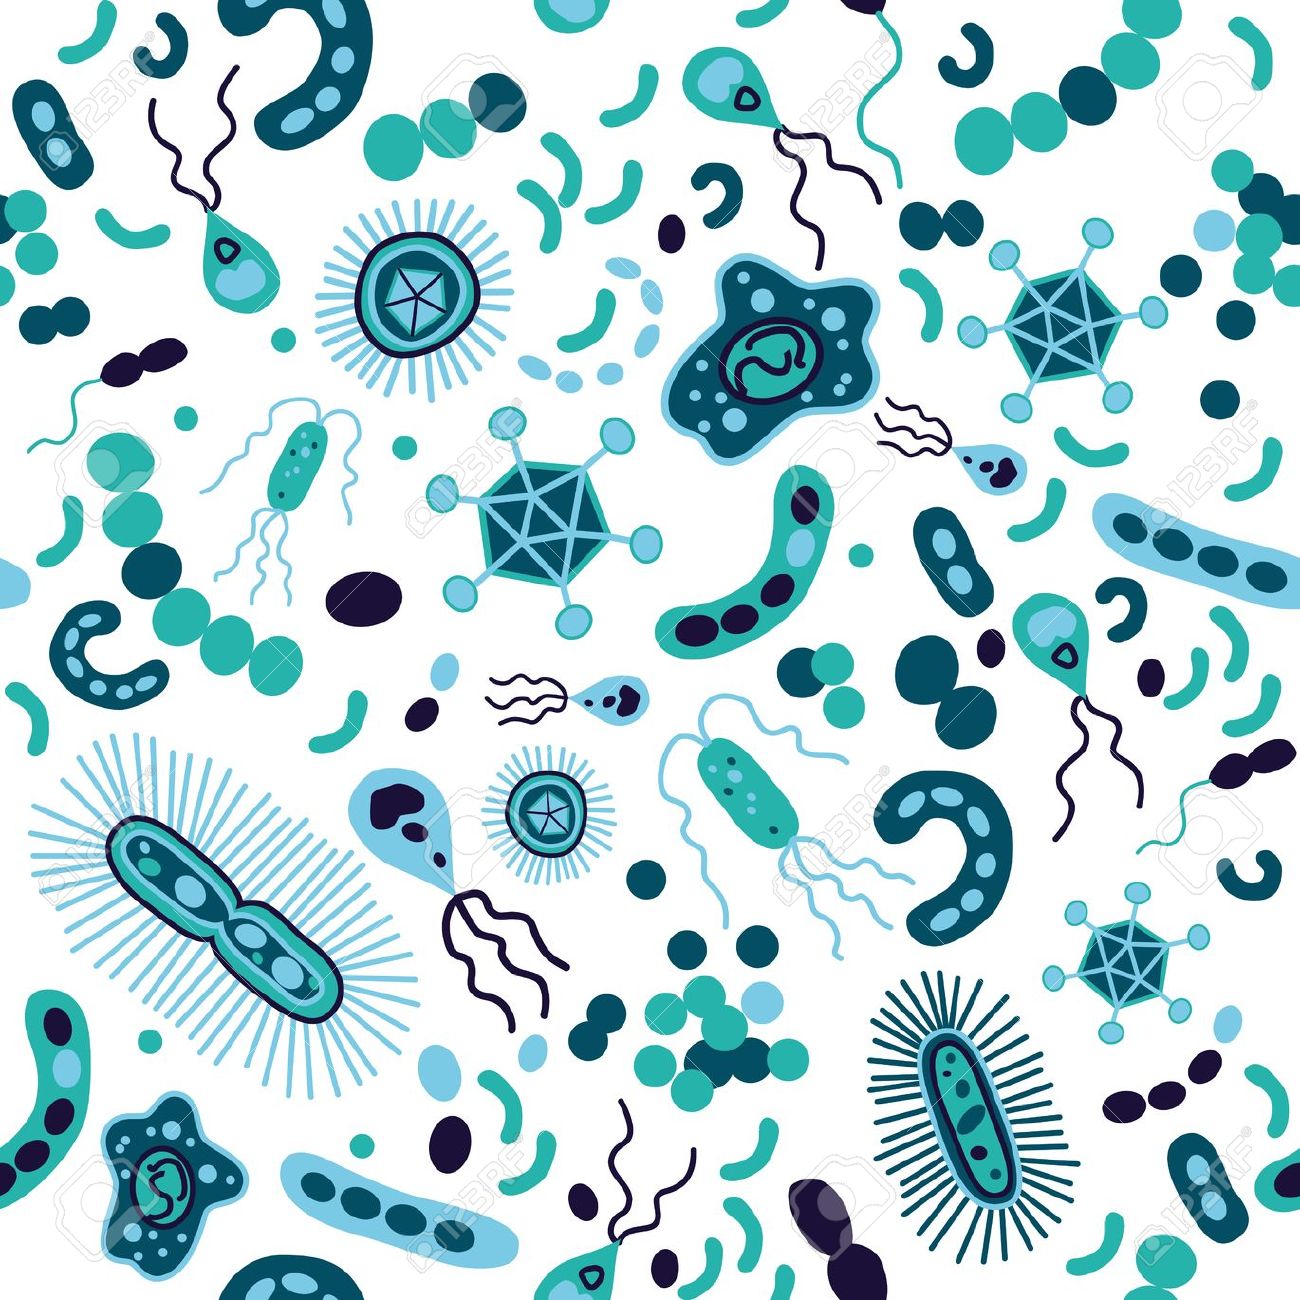 Viruses bacteria in water clipart clipartfest